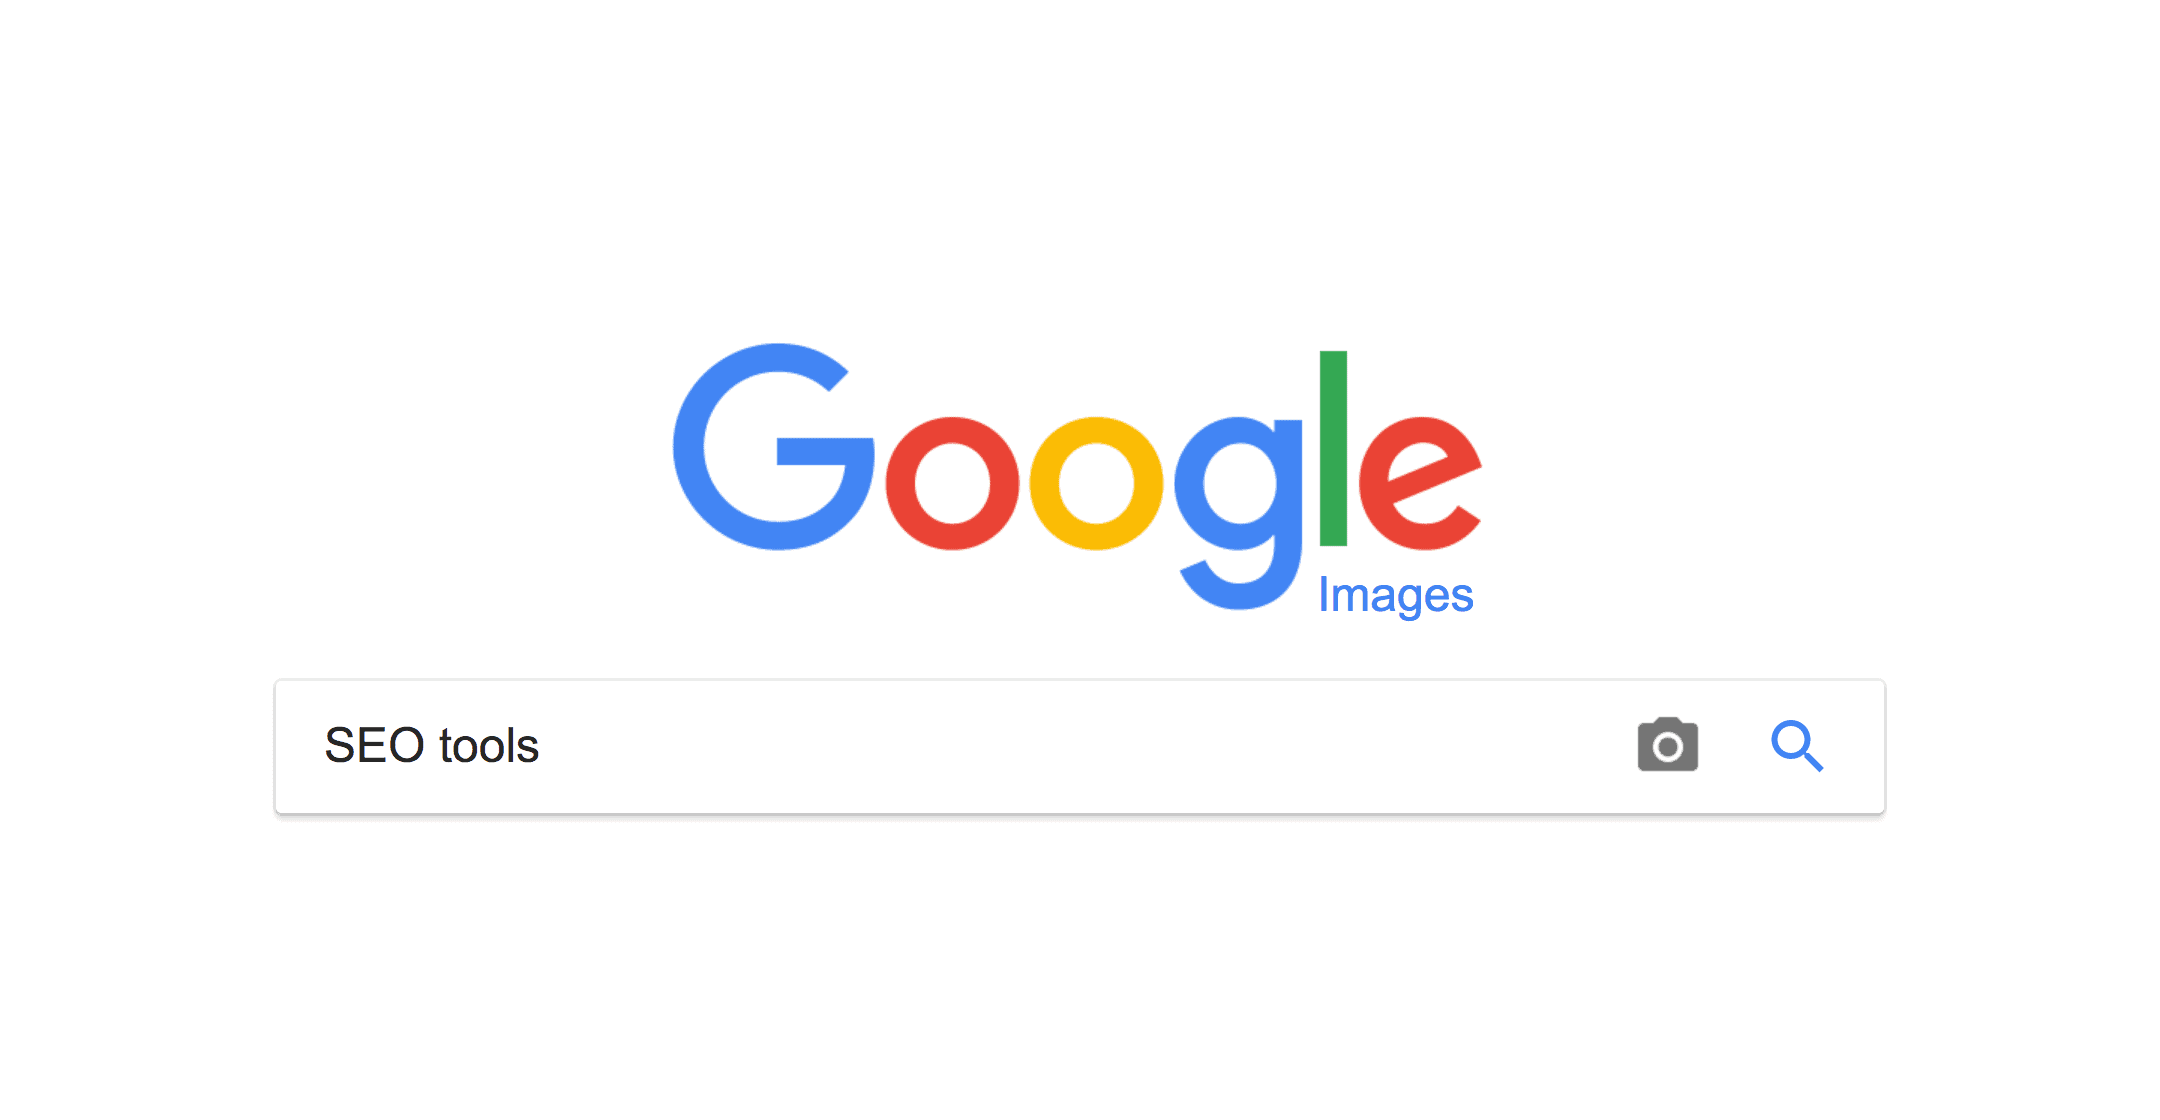 Google Images search